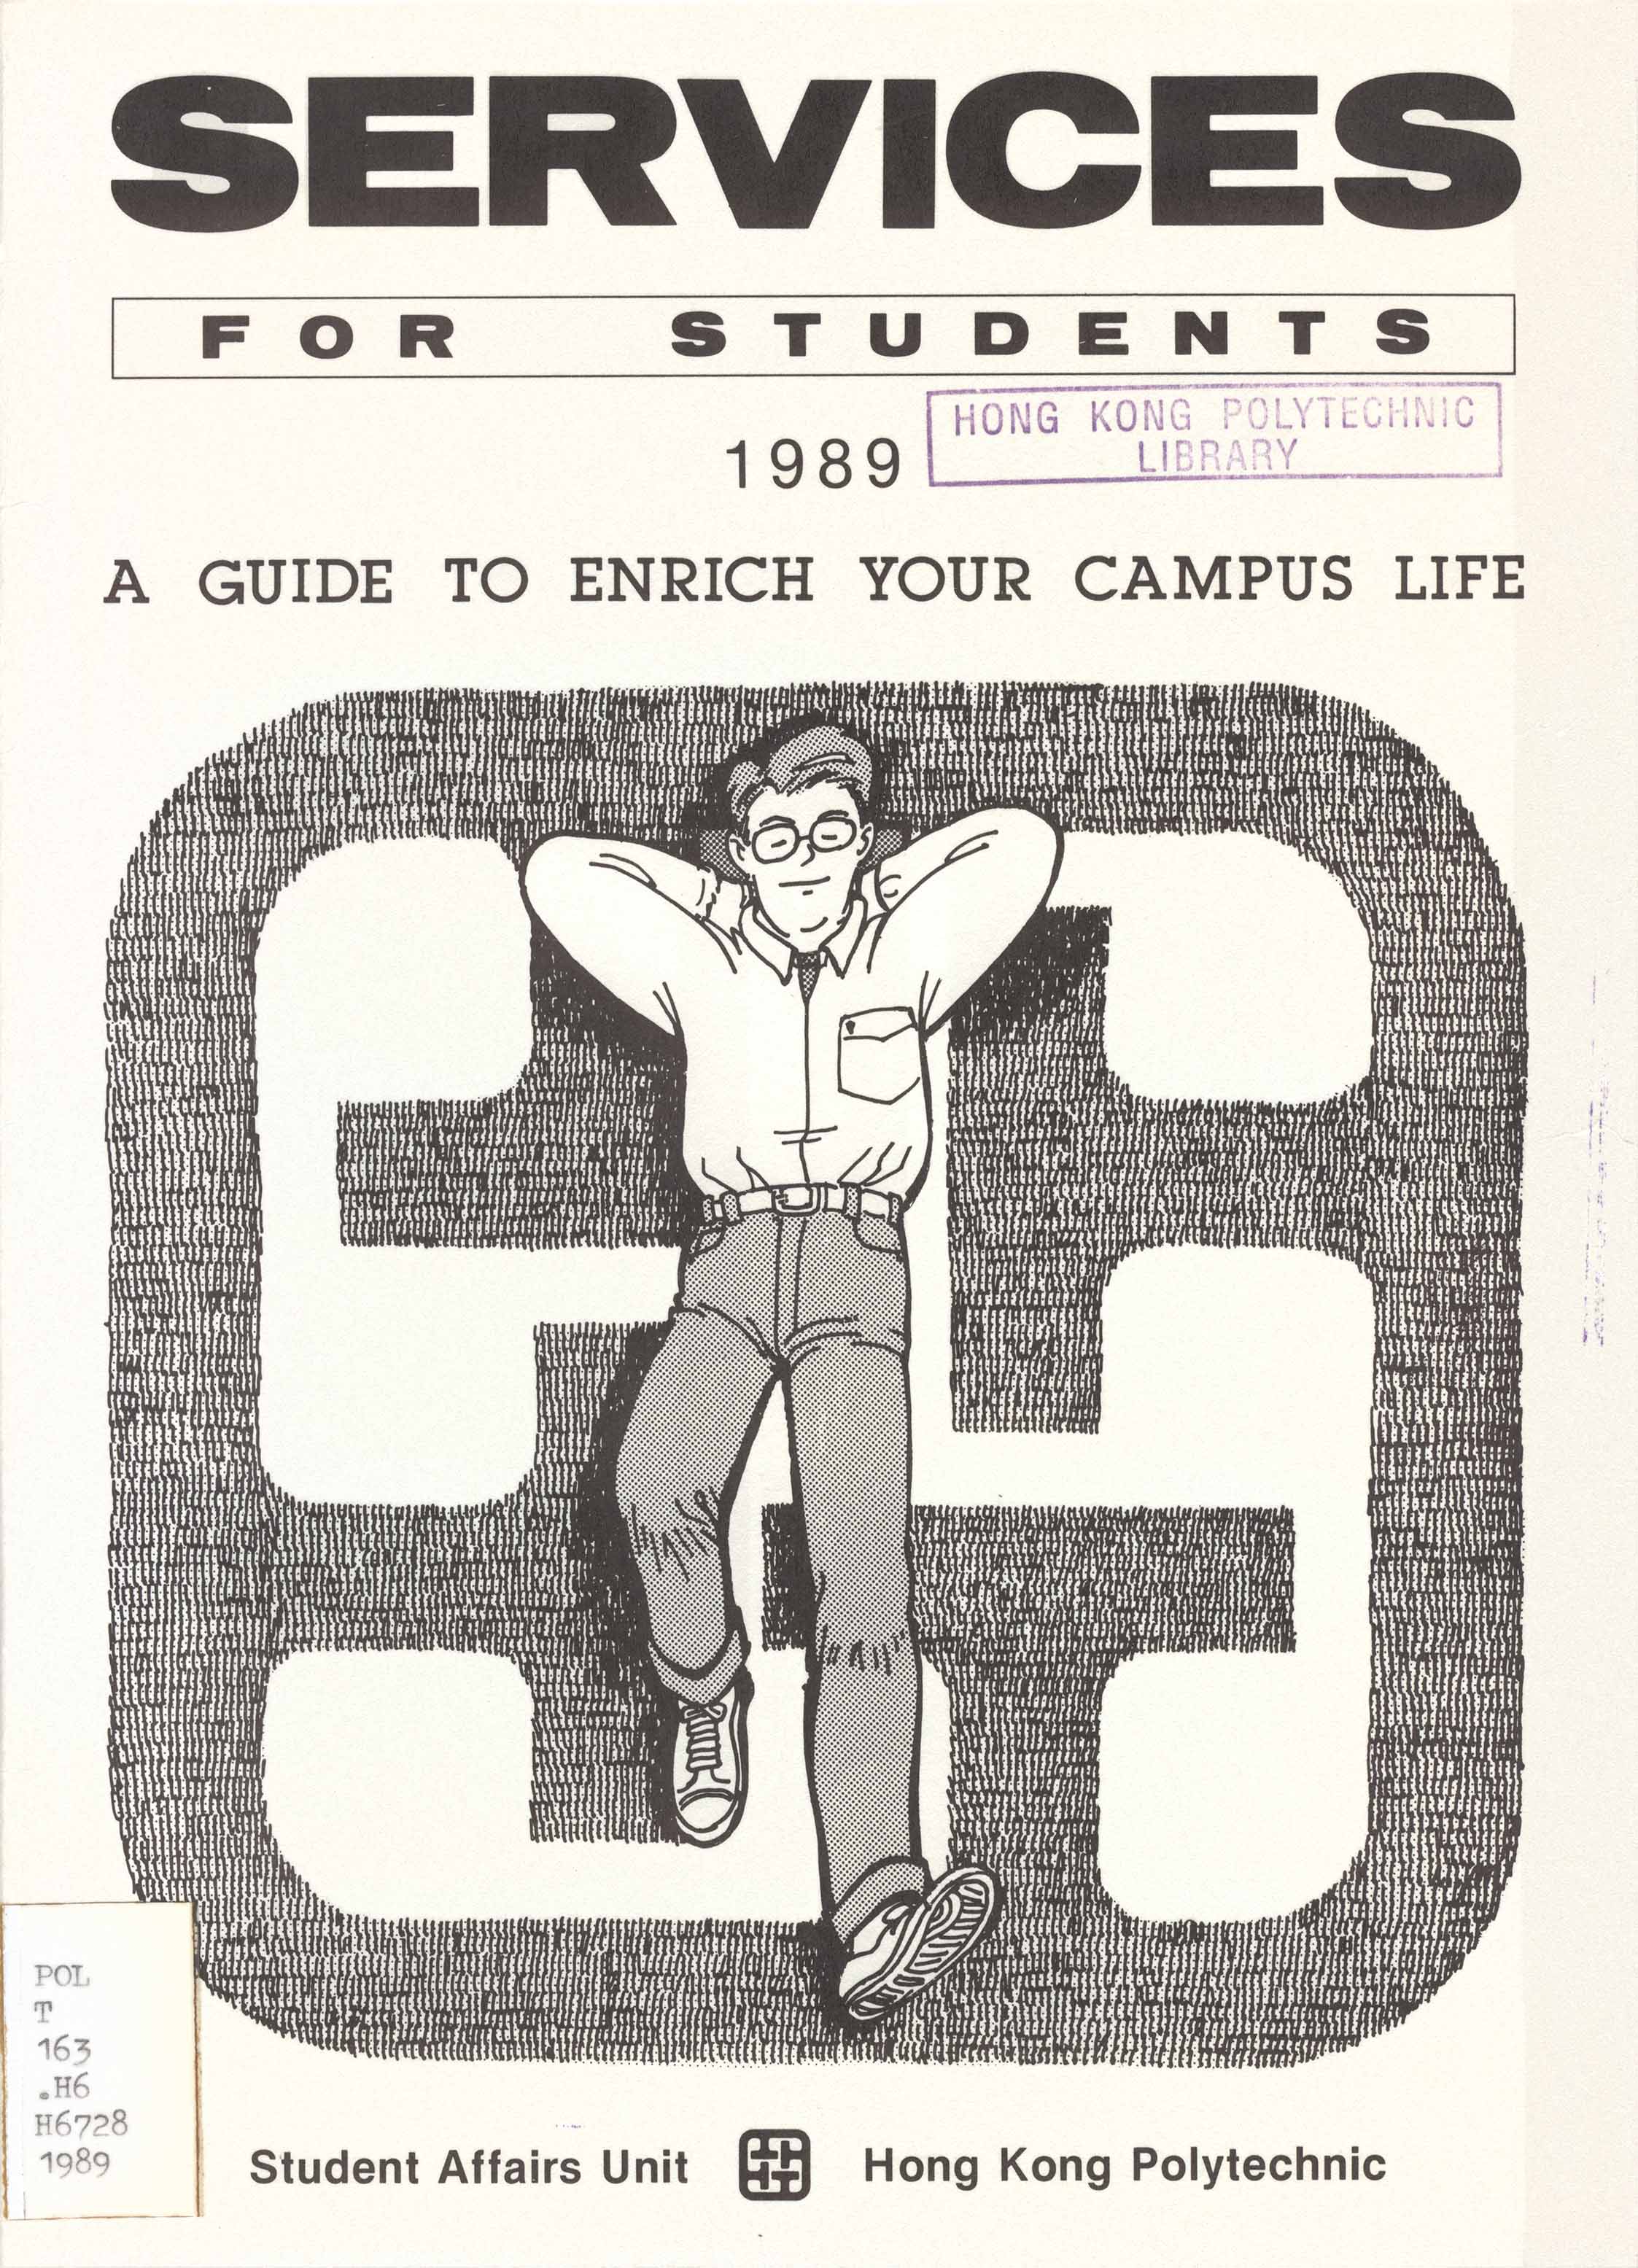 Services for students : a guide to enrich your campus life [1989]